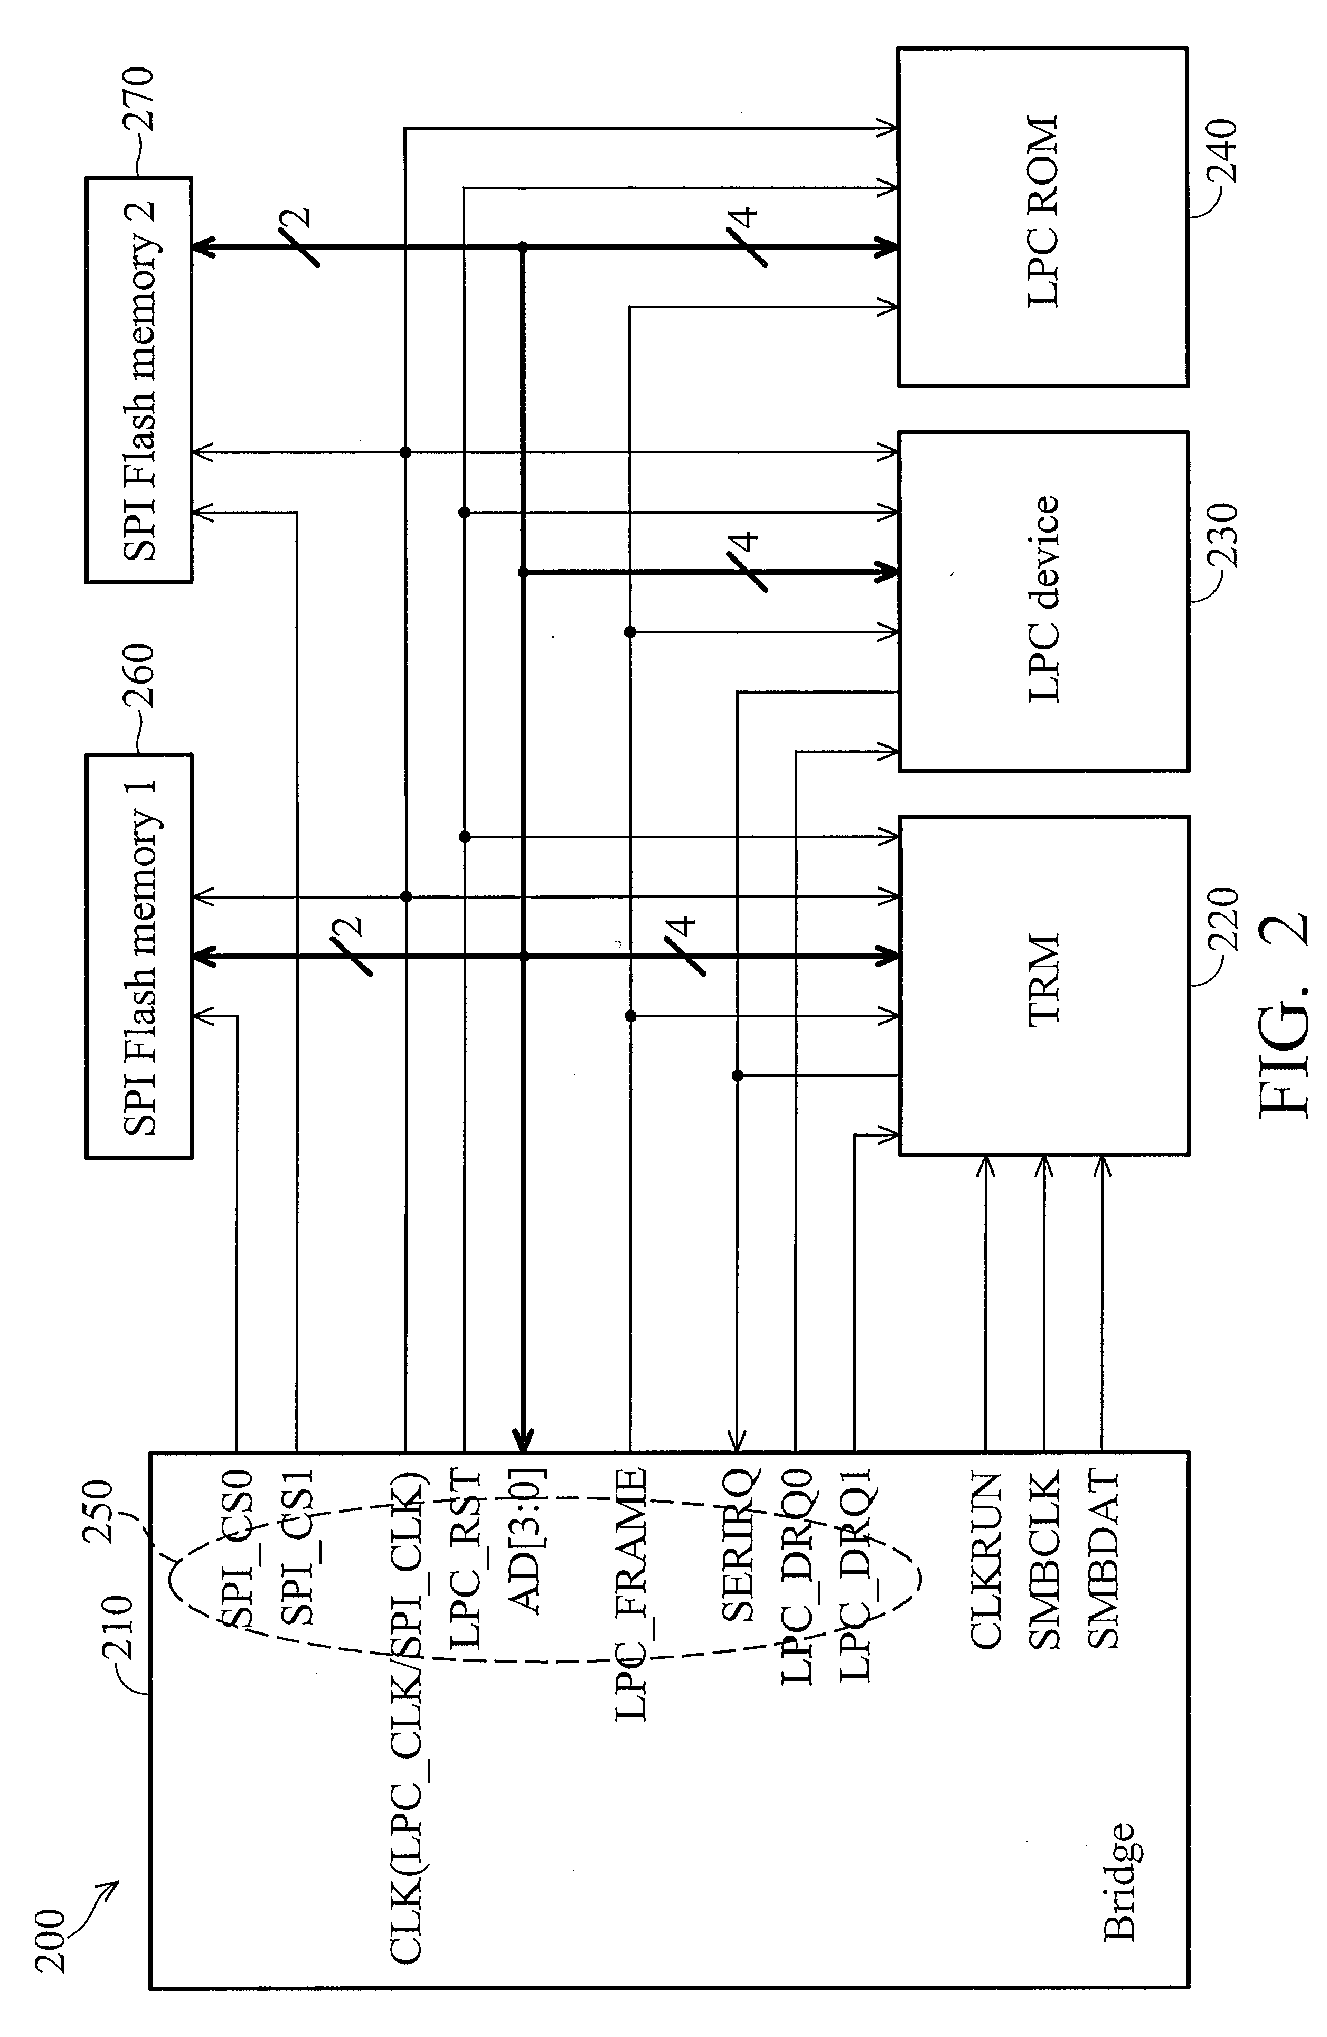 Method and system for dynamic switching between multiplexed interfaces